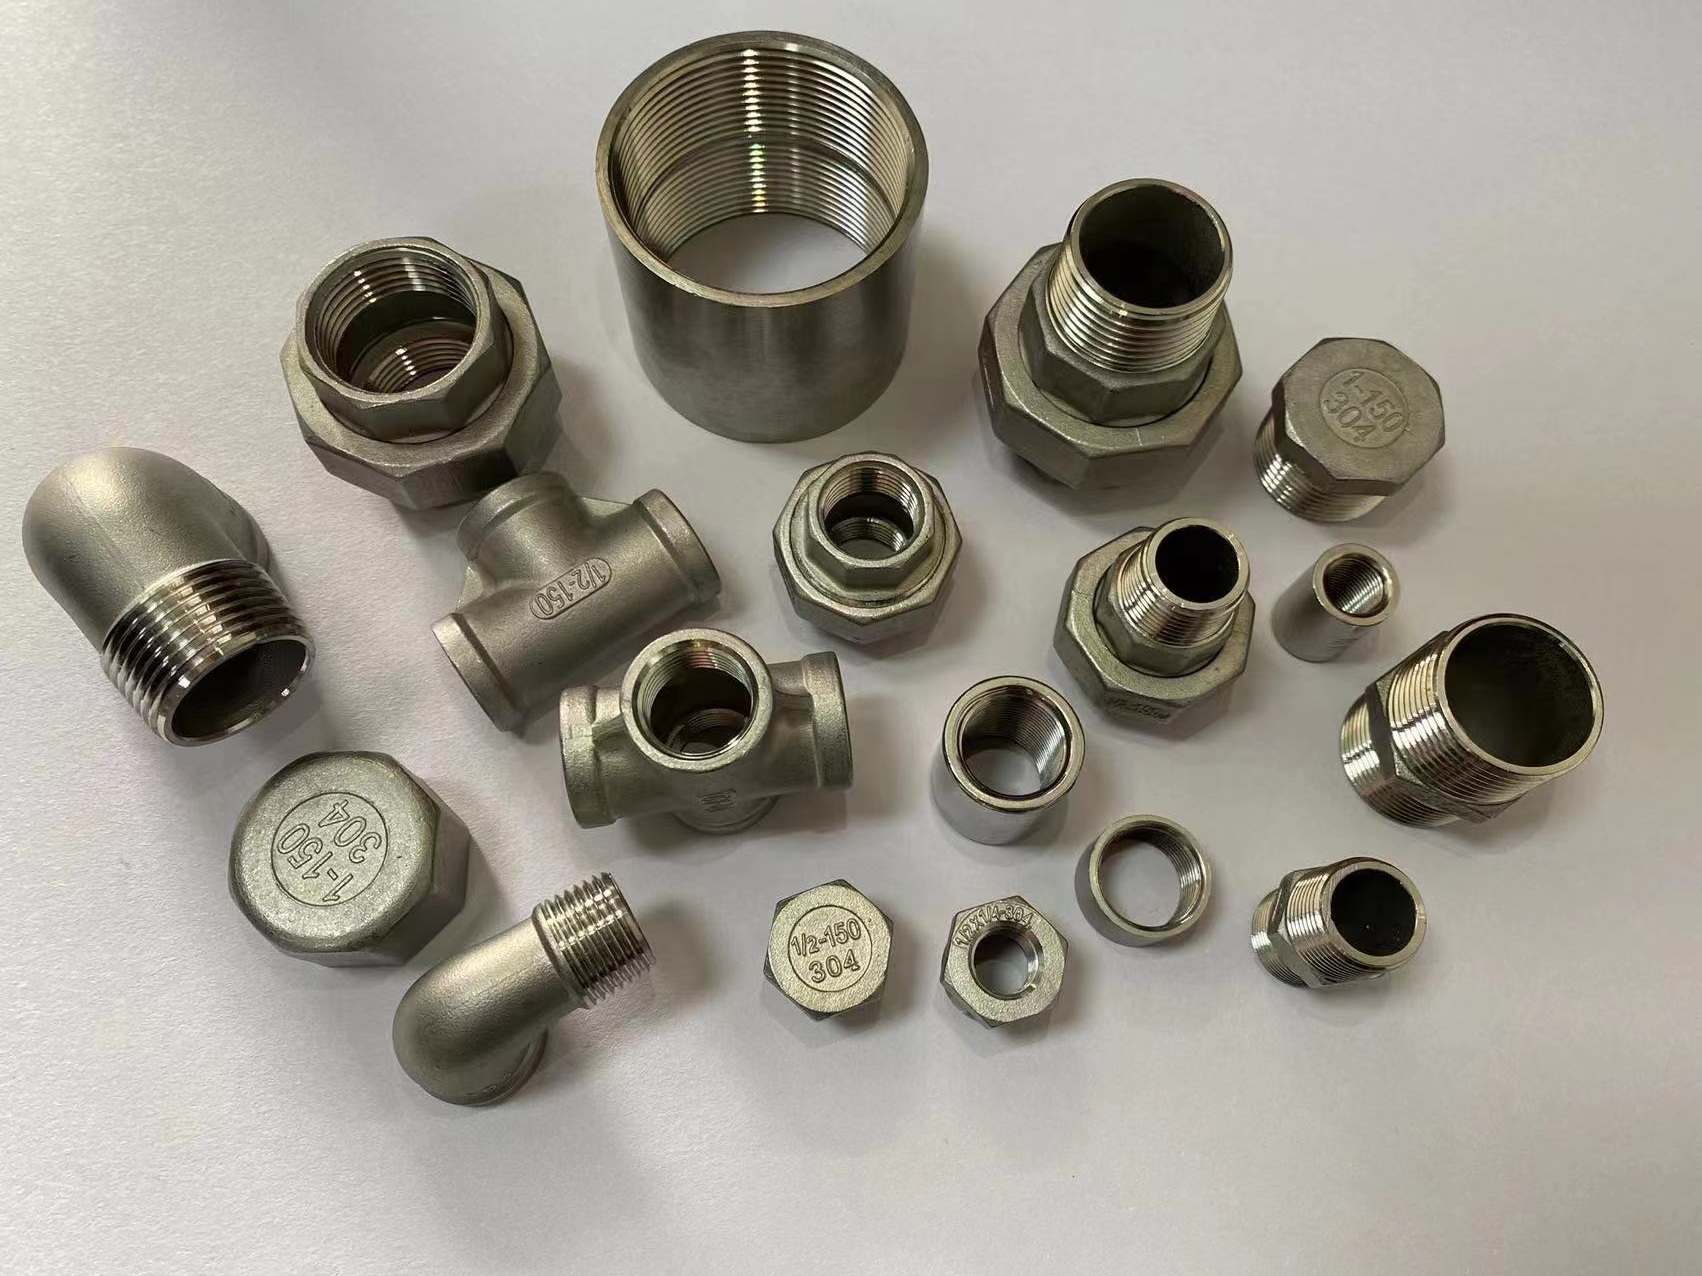 Stainless Steel Pipe Fittings 304 2" NPT/BSPT Threaded 45 Degree Elbow